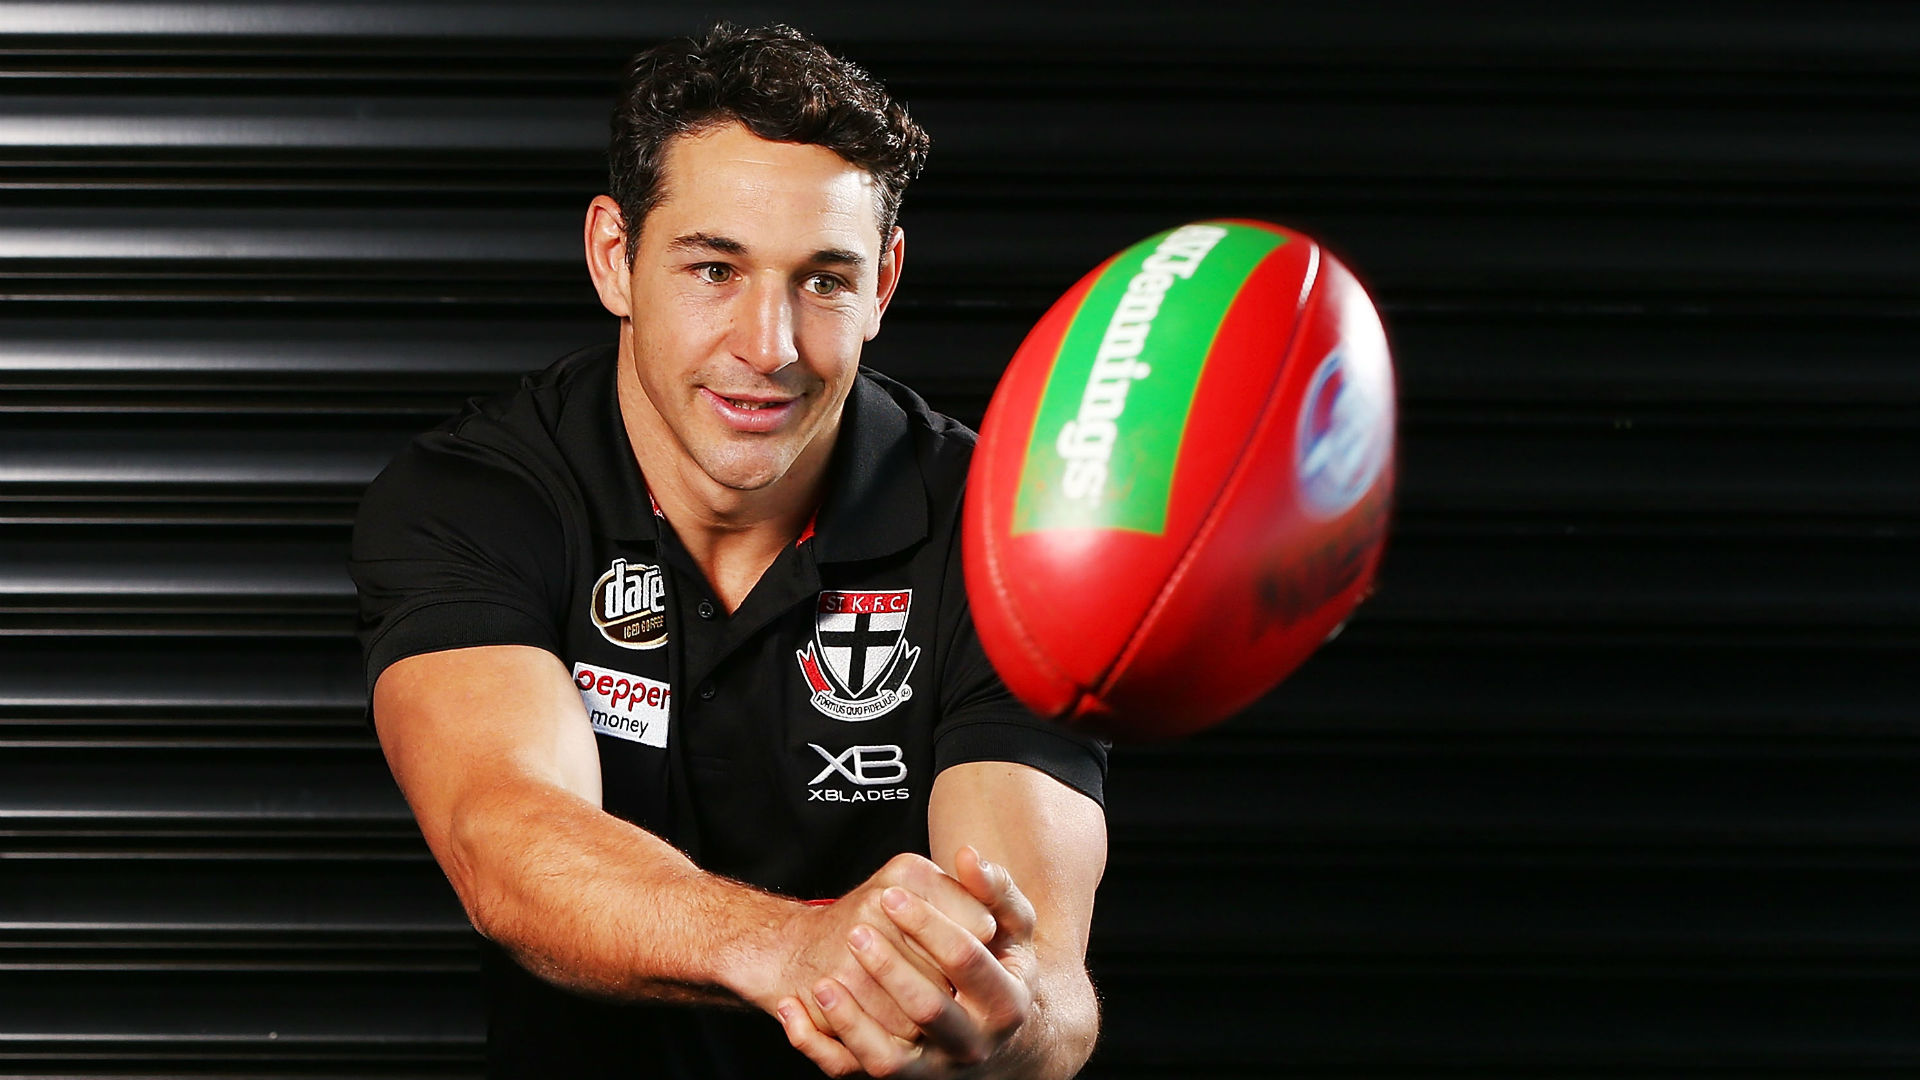 St Kilda feel retired Australia rugby league legend Billy Slater will "add great value" to the AFL club.